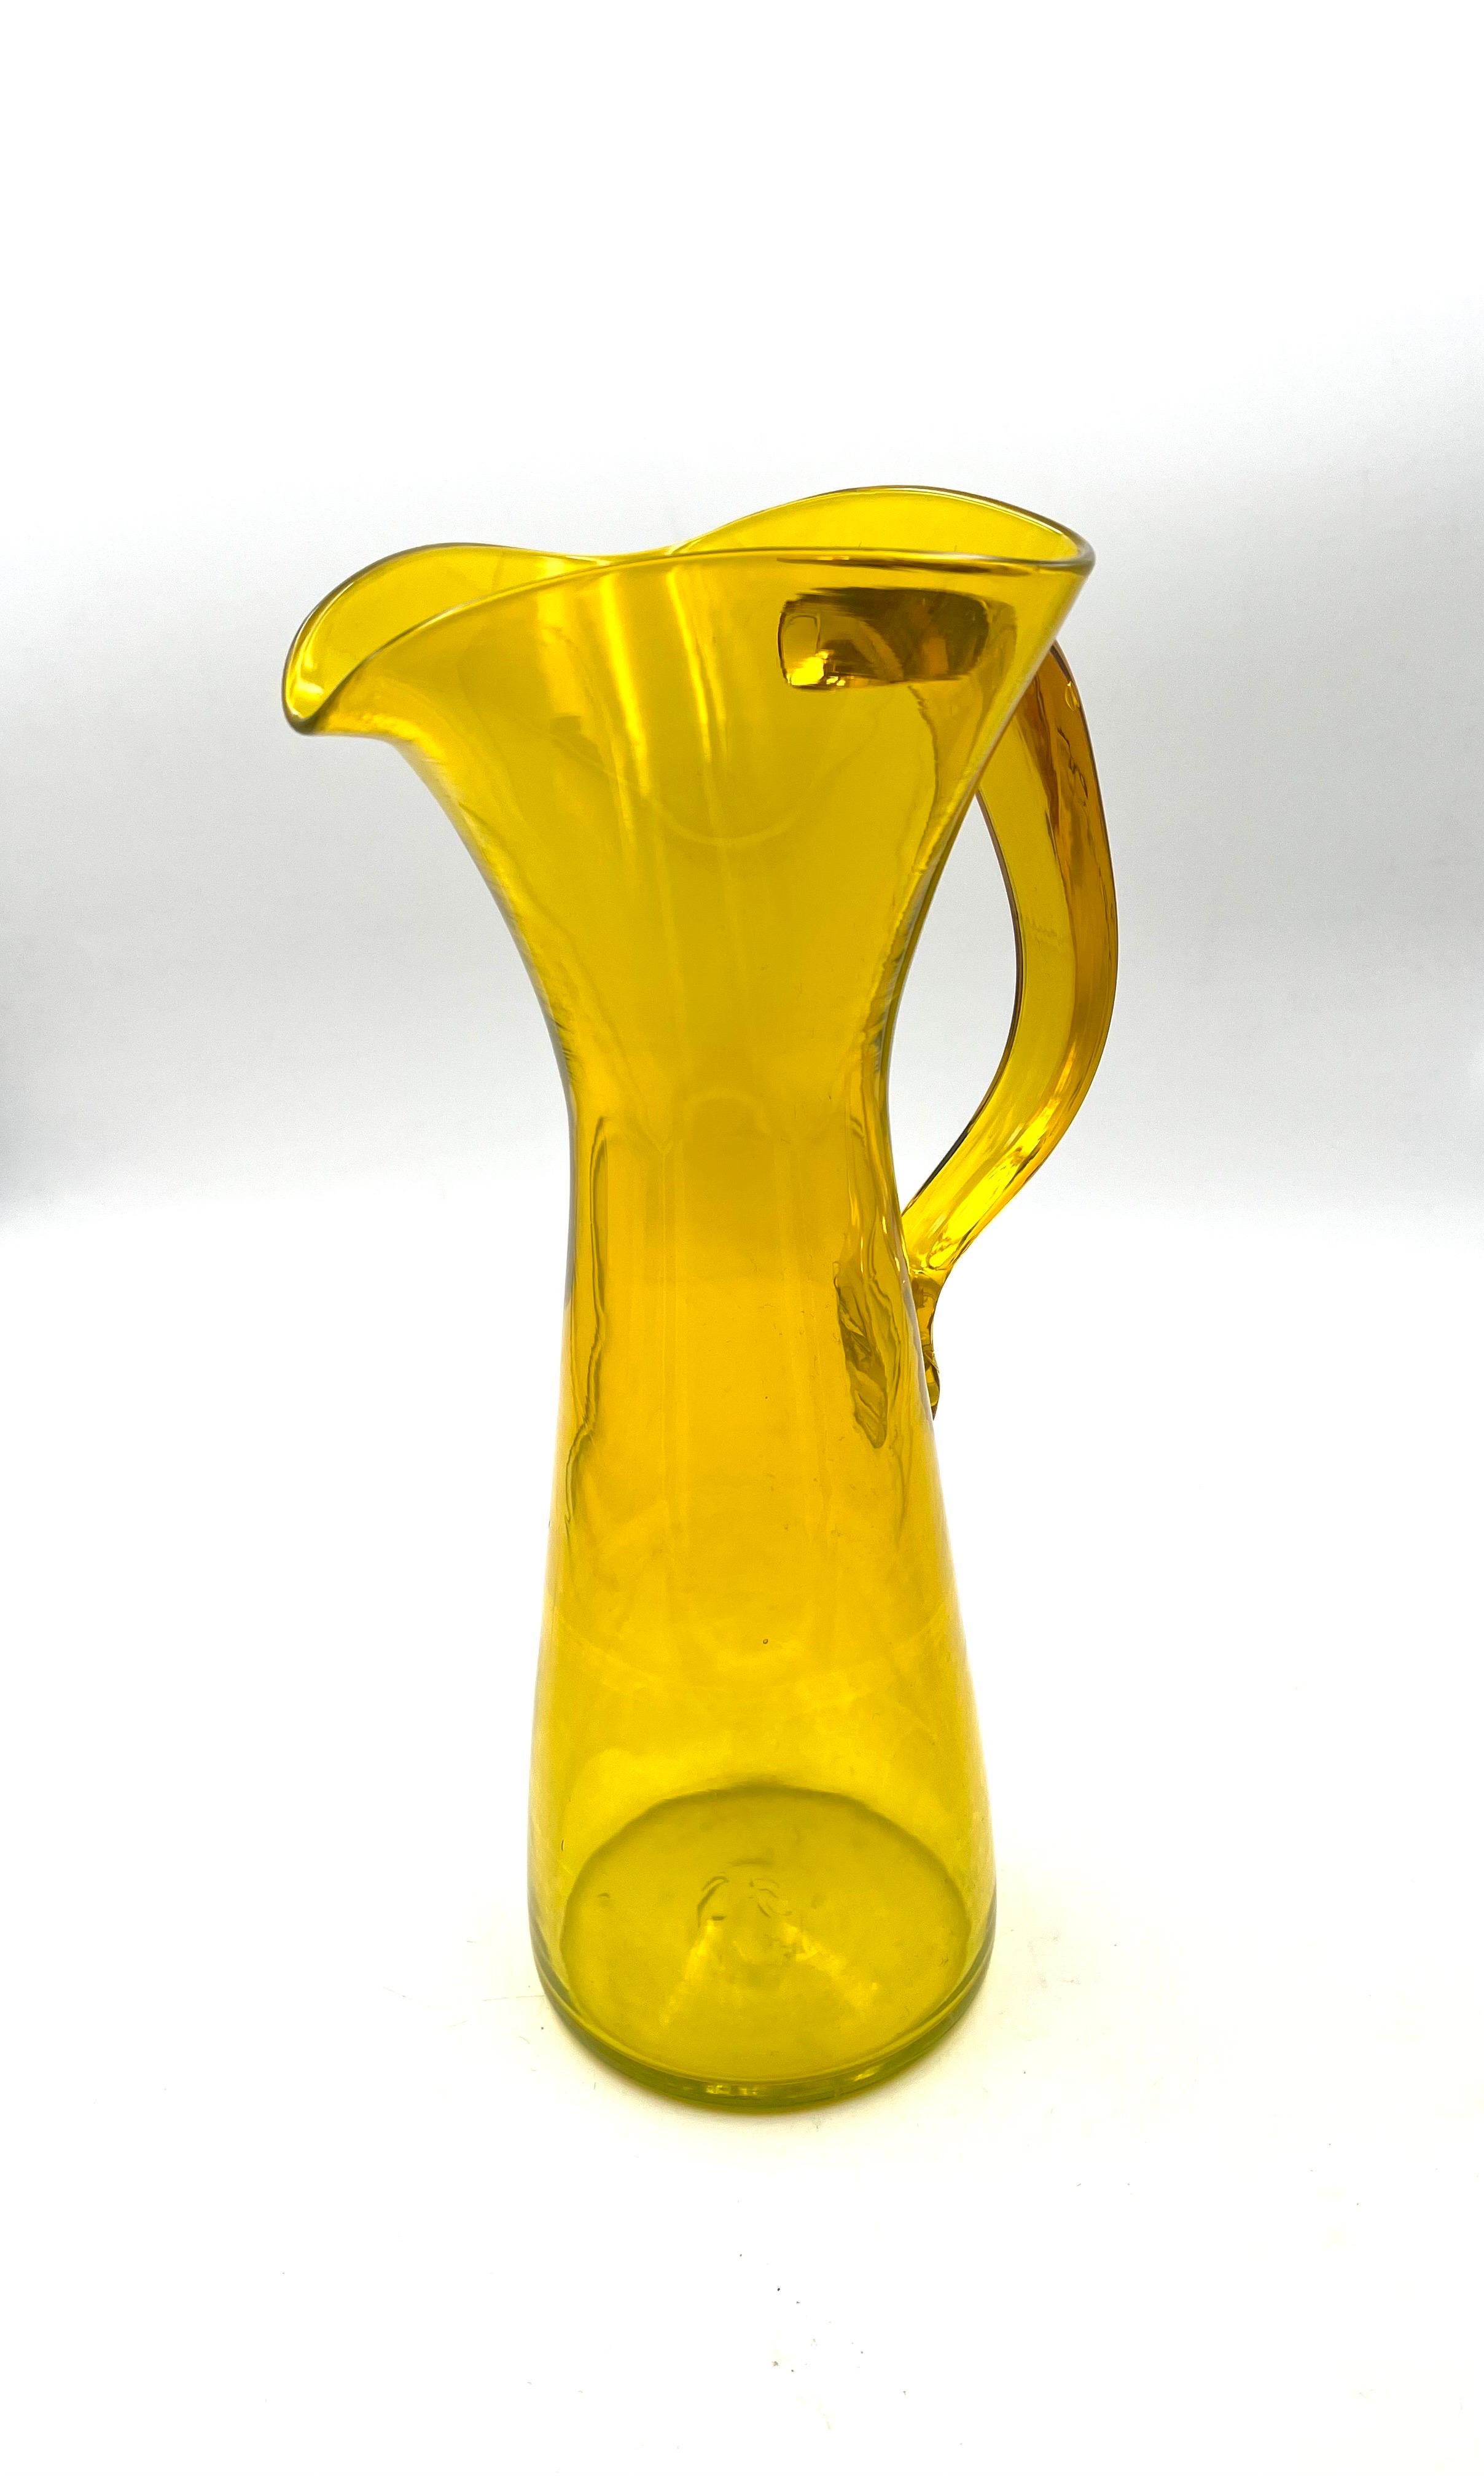 Beautiful color and excellent condition on this tall glass pitcher. by Blenko.